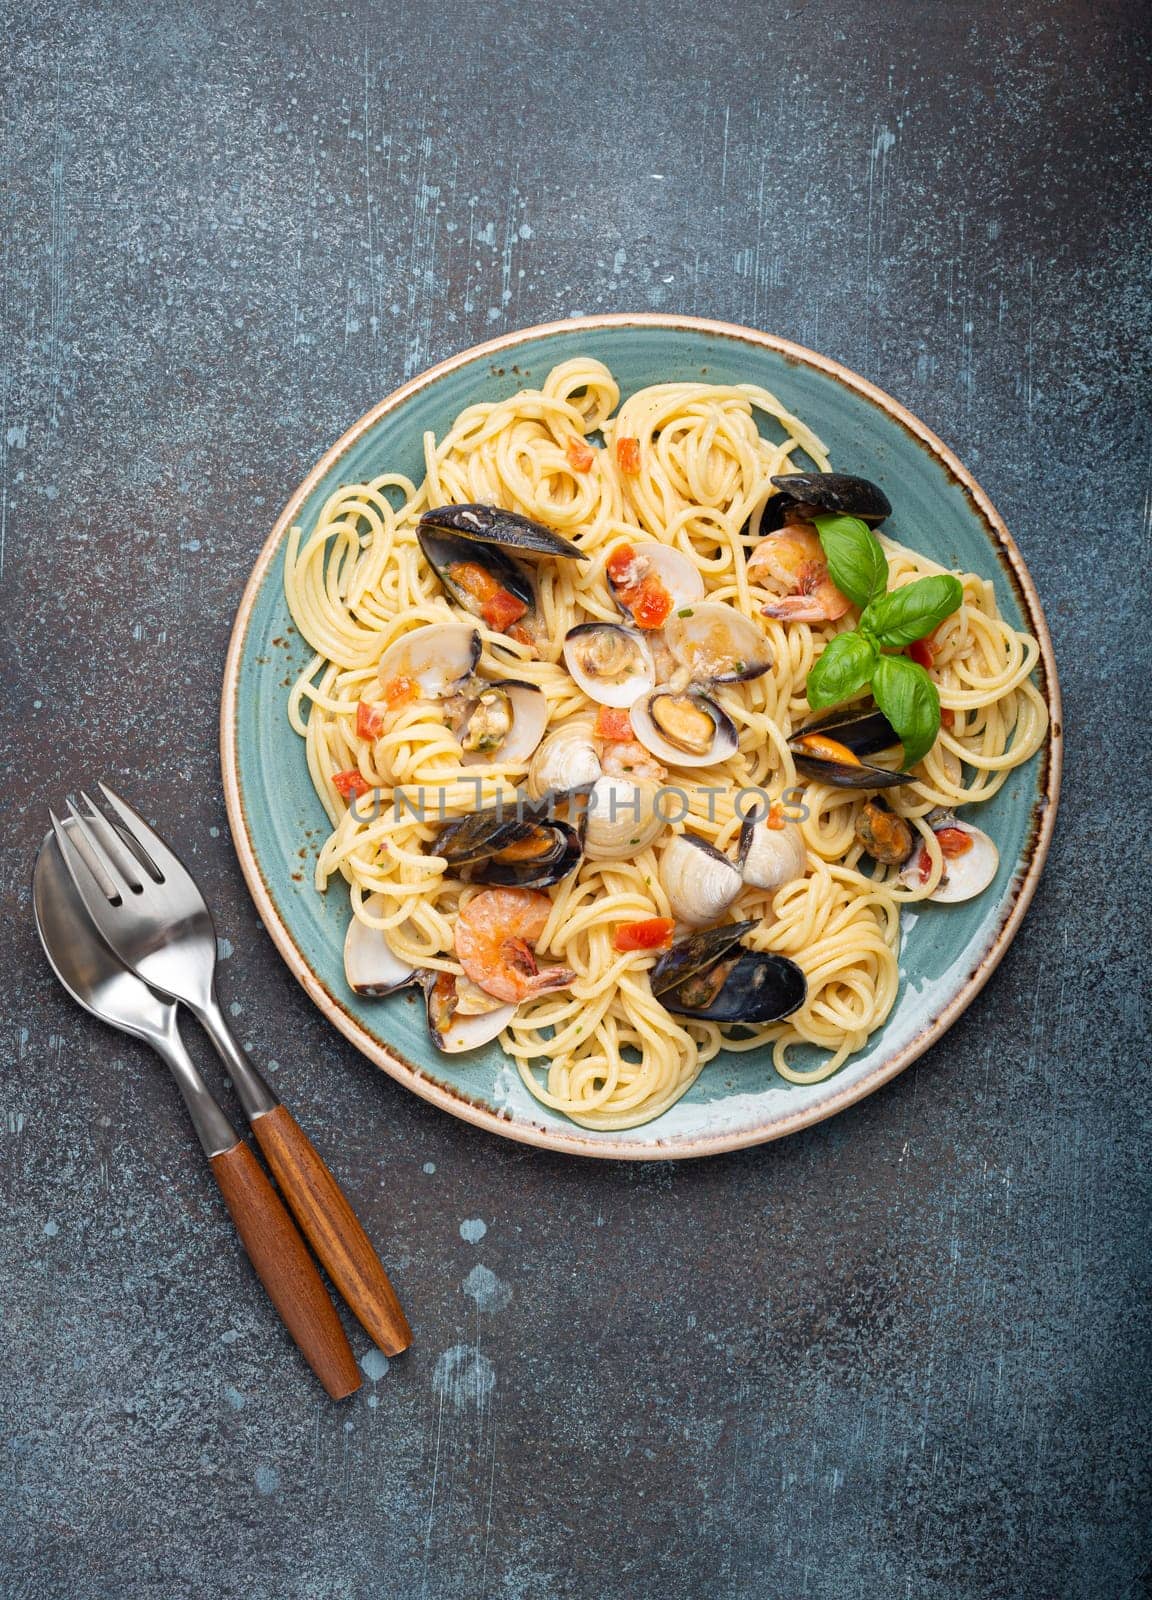 Italian seafood pasta spaghetti with mussels, shrimps, clams in tomato sauce with green basil on plate on rustic blue concrete background top view. Mediterranean cuisine by its_al_dente